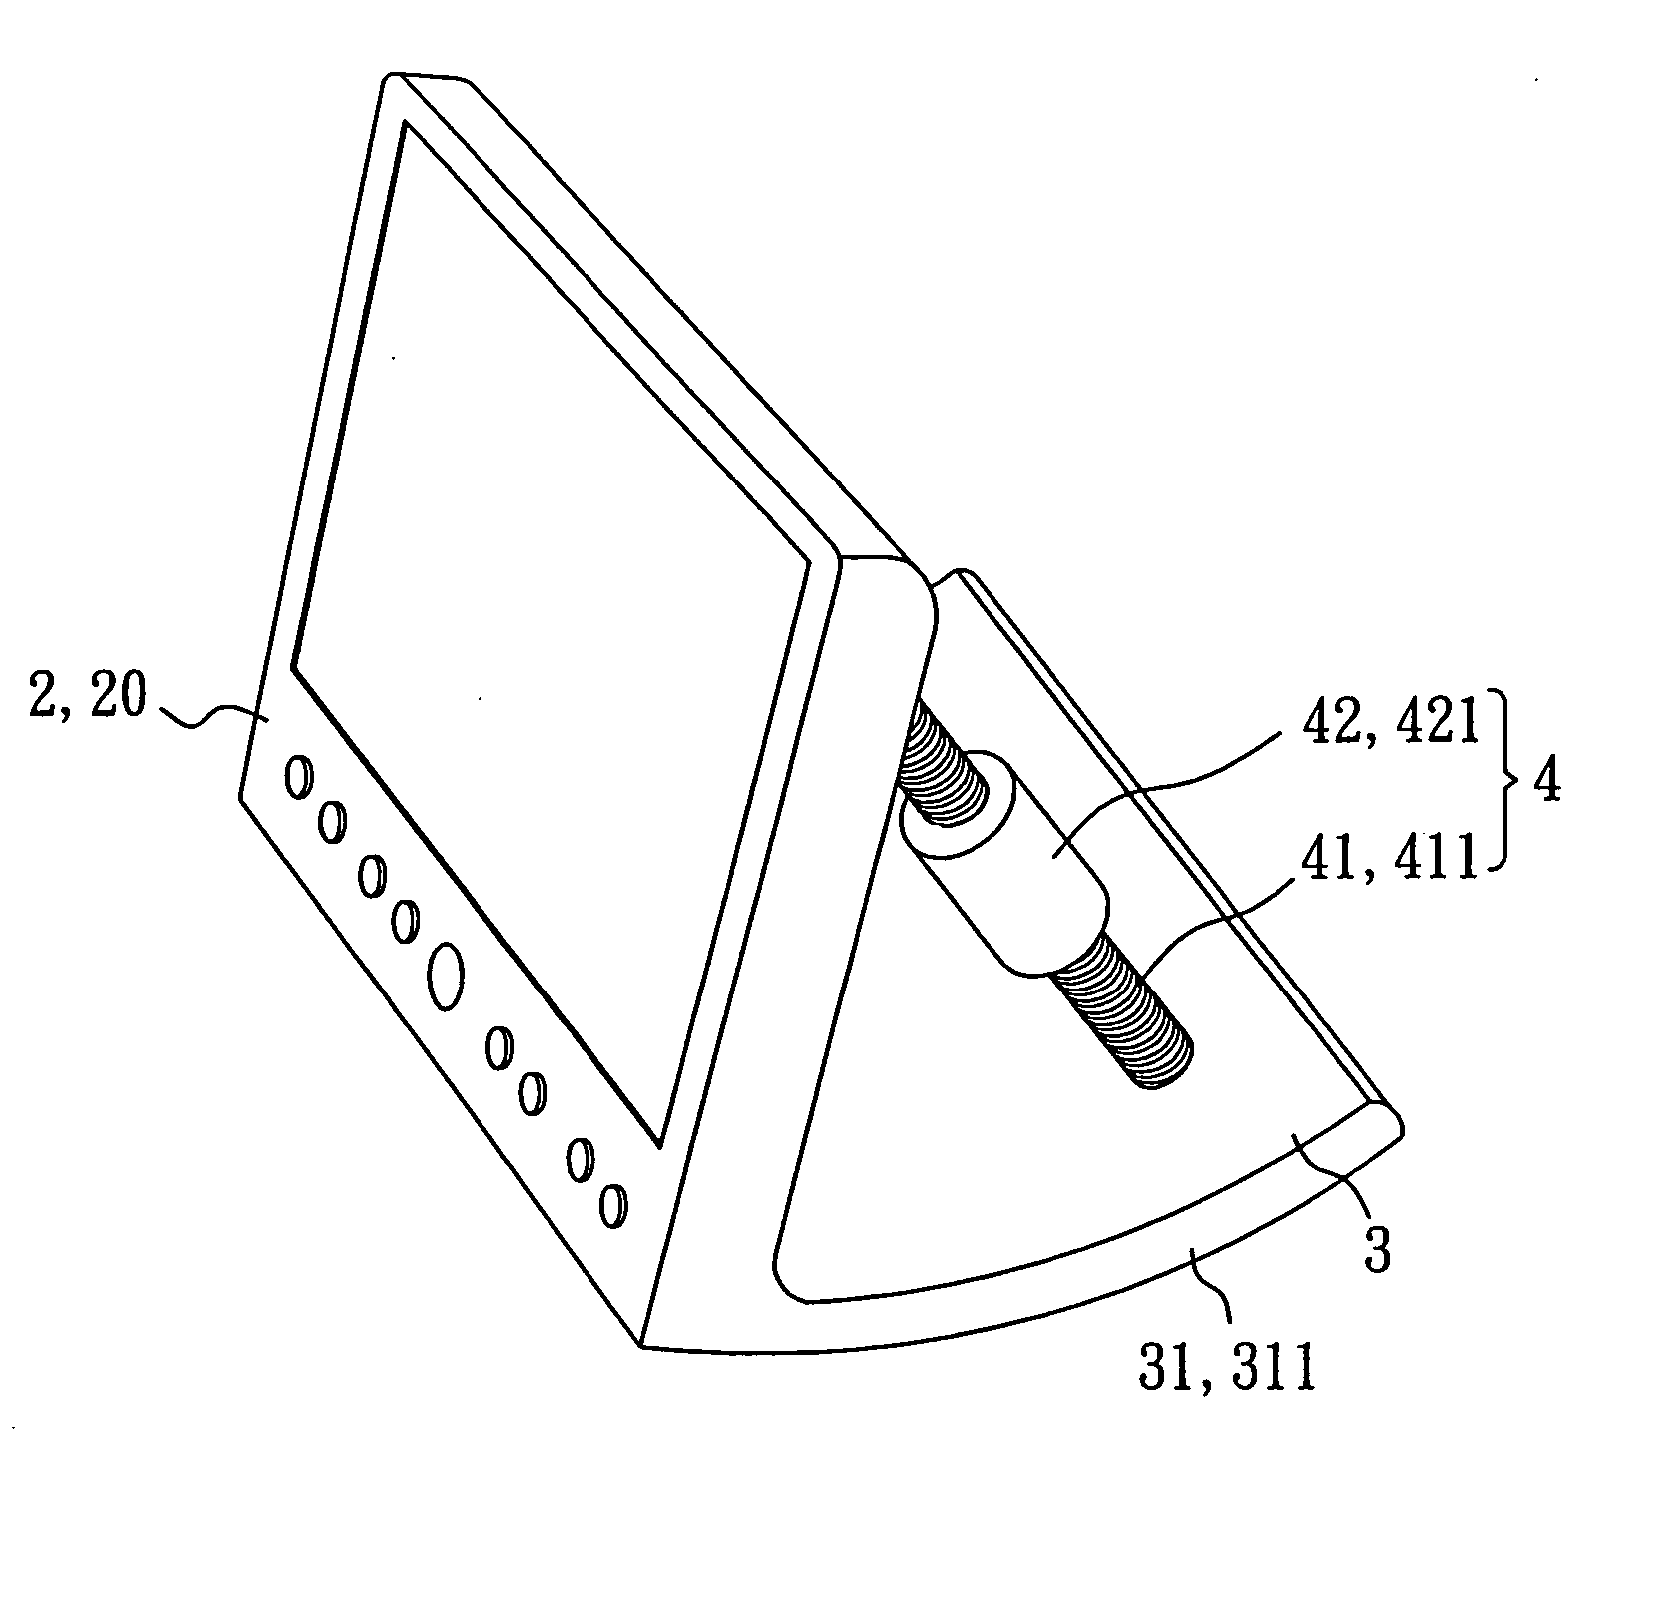 Display device having an adjustable counterweight structure